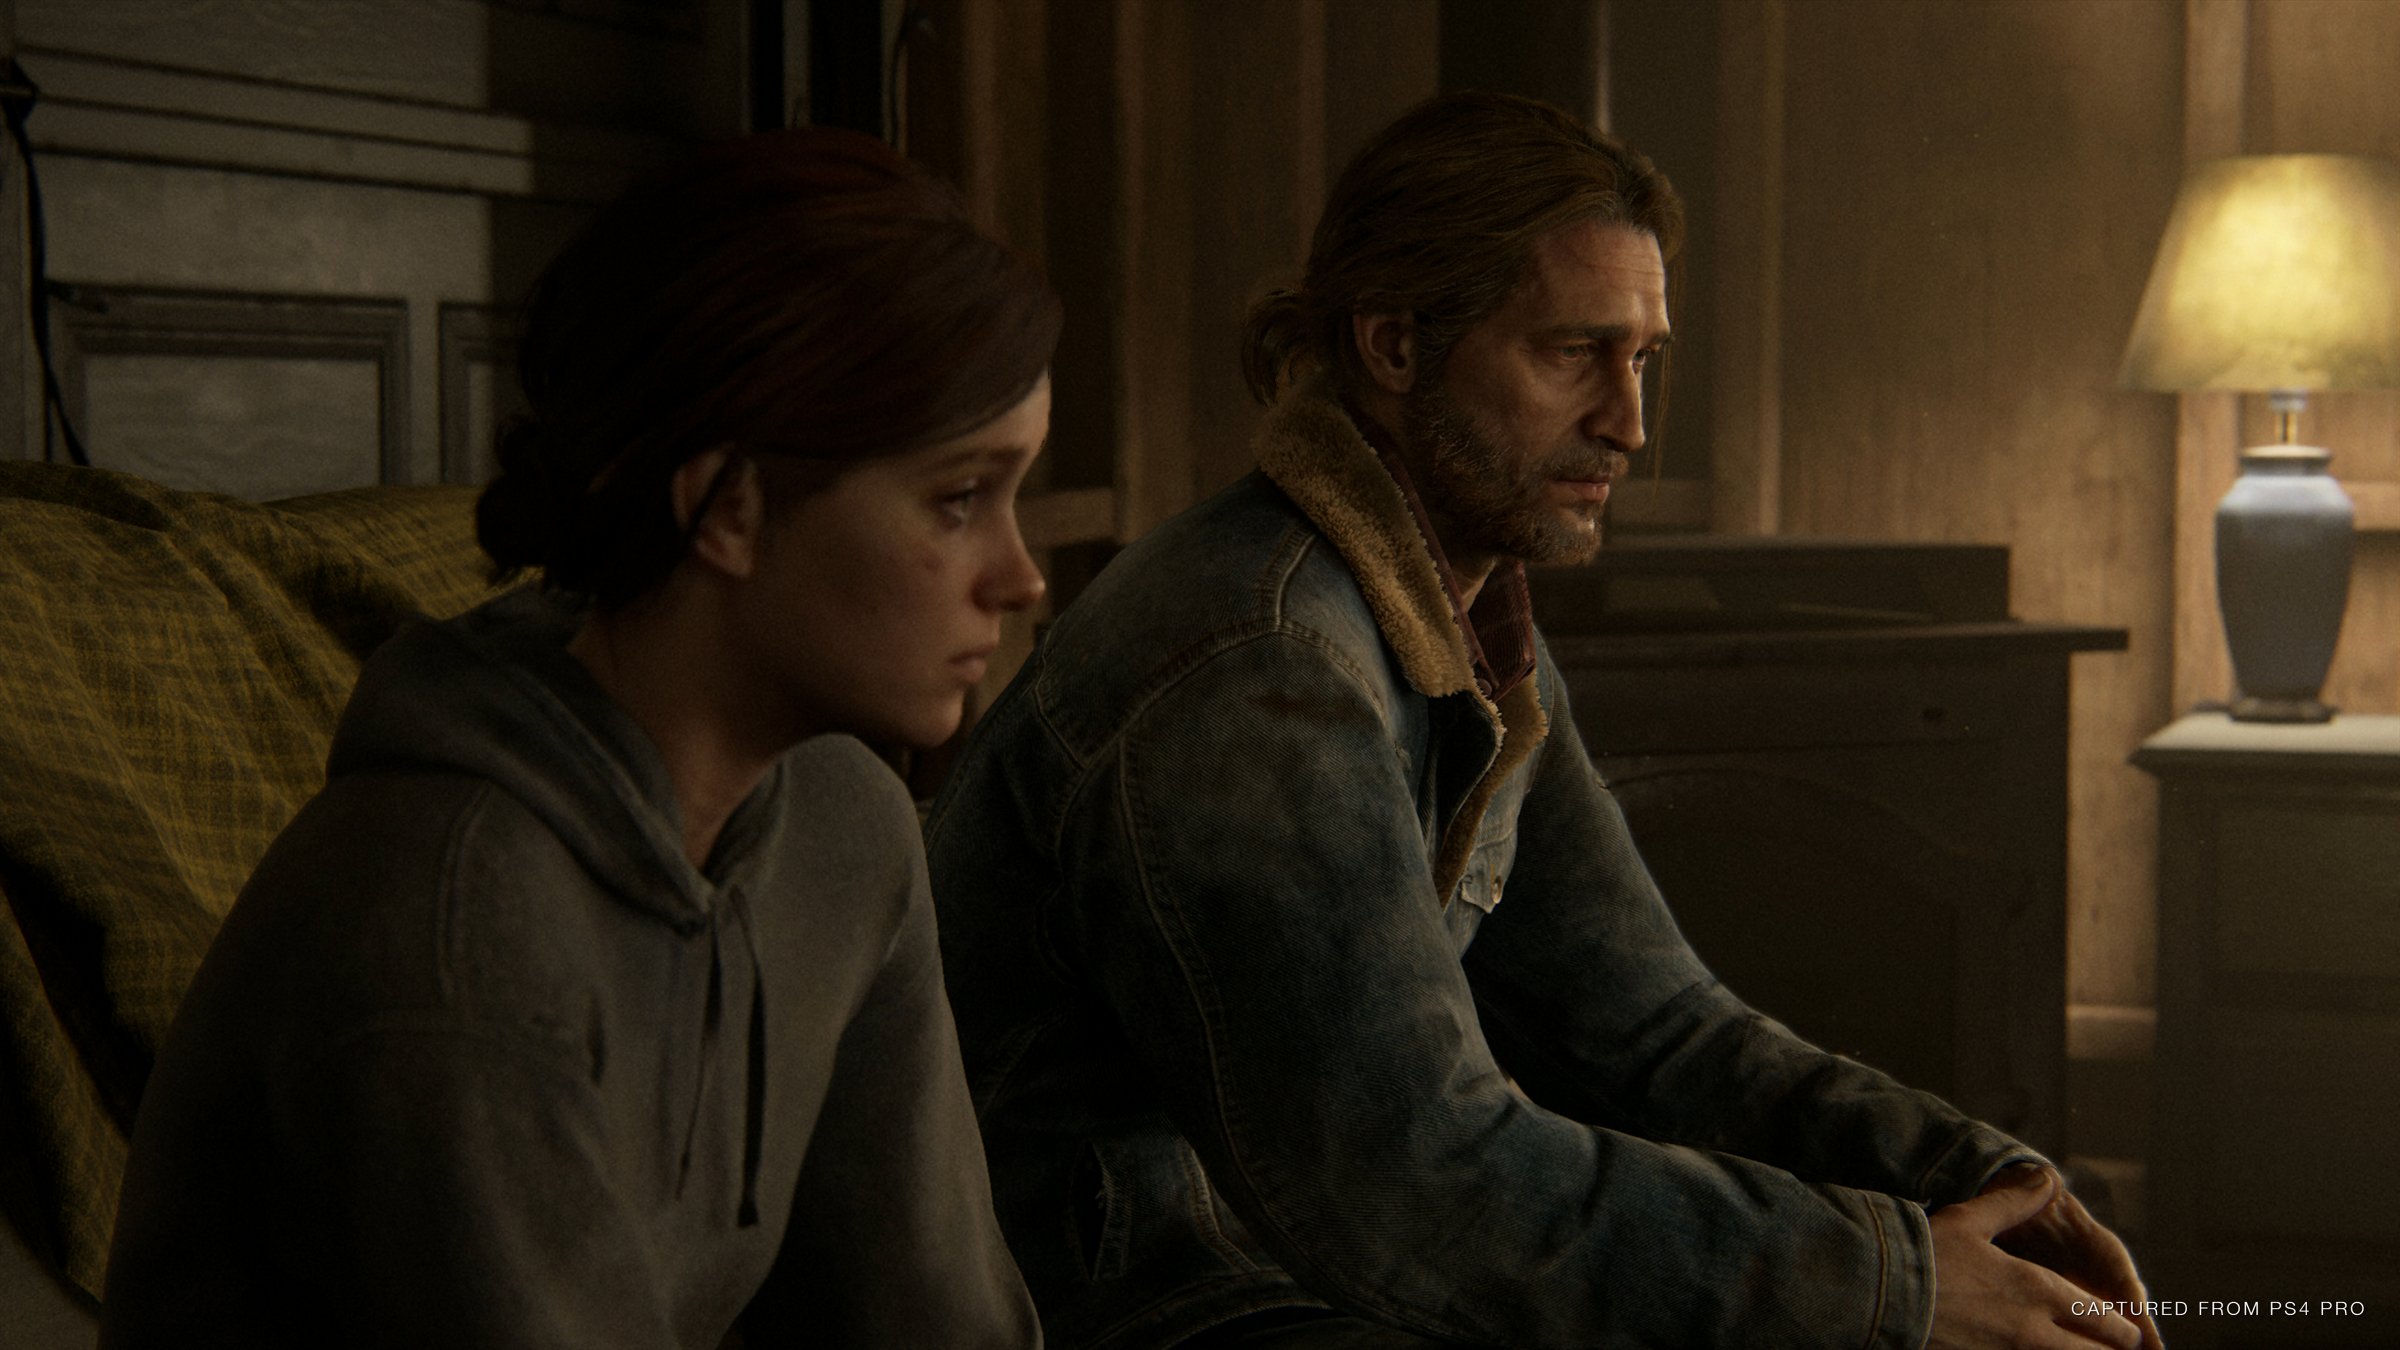 Ellie and Tommy sit in silence as they grieve their loss